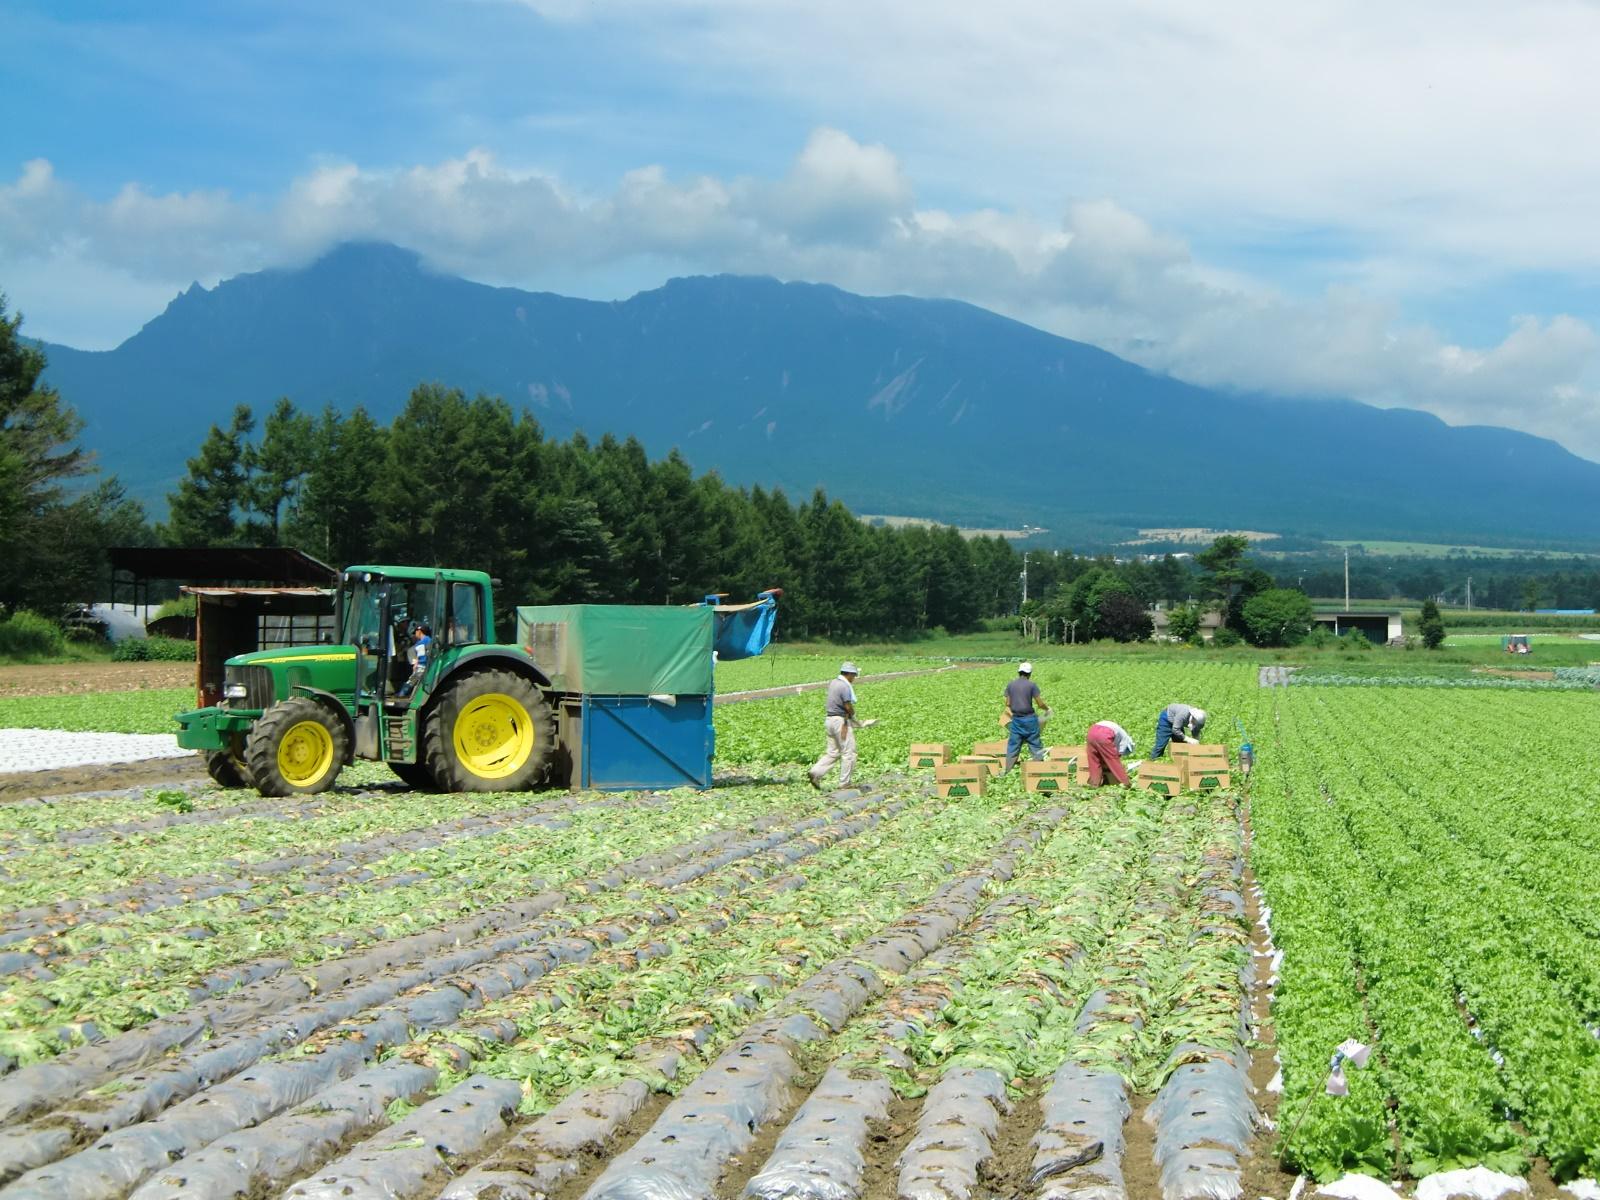 Agriculture workers next to a tractor on a Japanese farm.